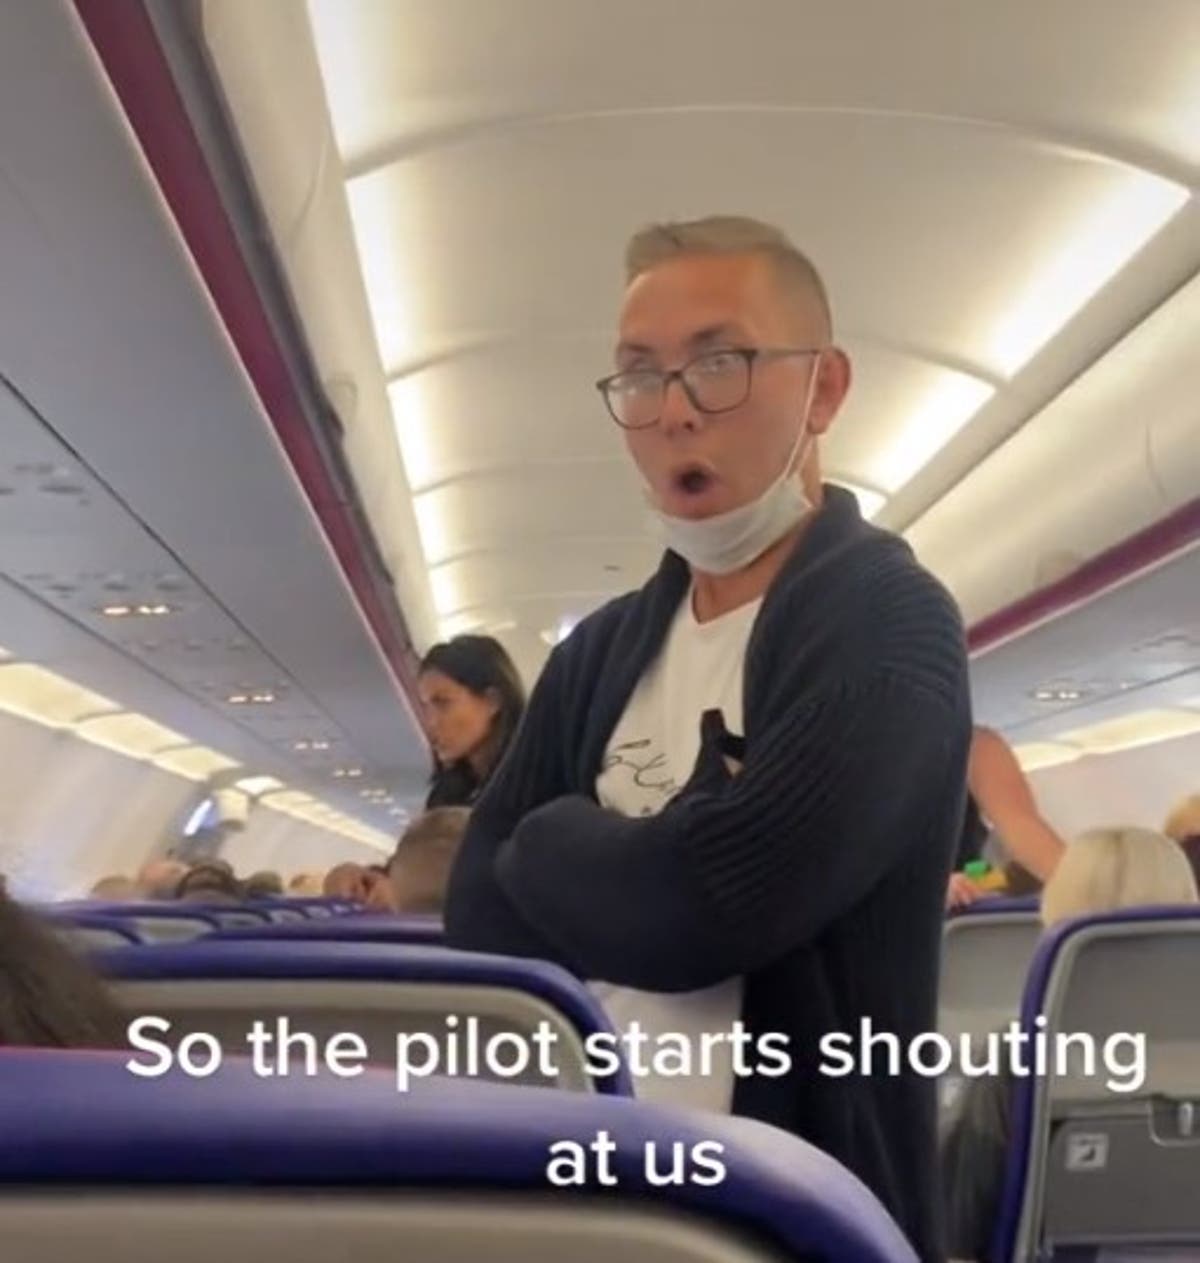 ‘I don’t need this’: Wizz Air pilot rants at passengers after seven-hour delay